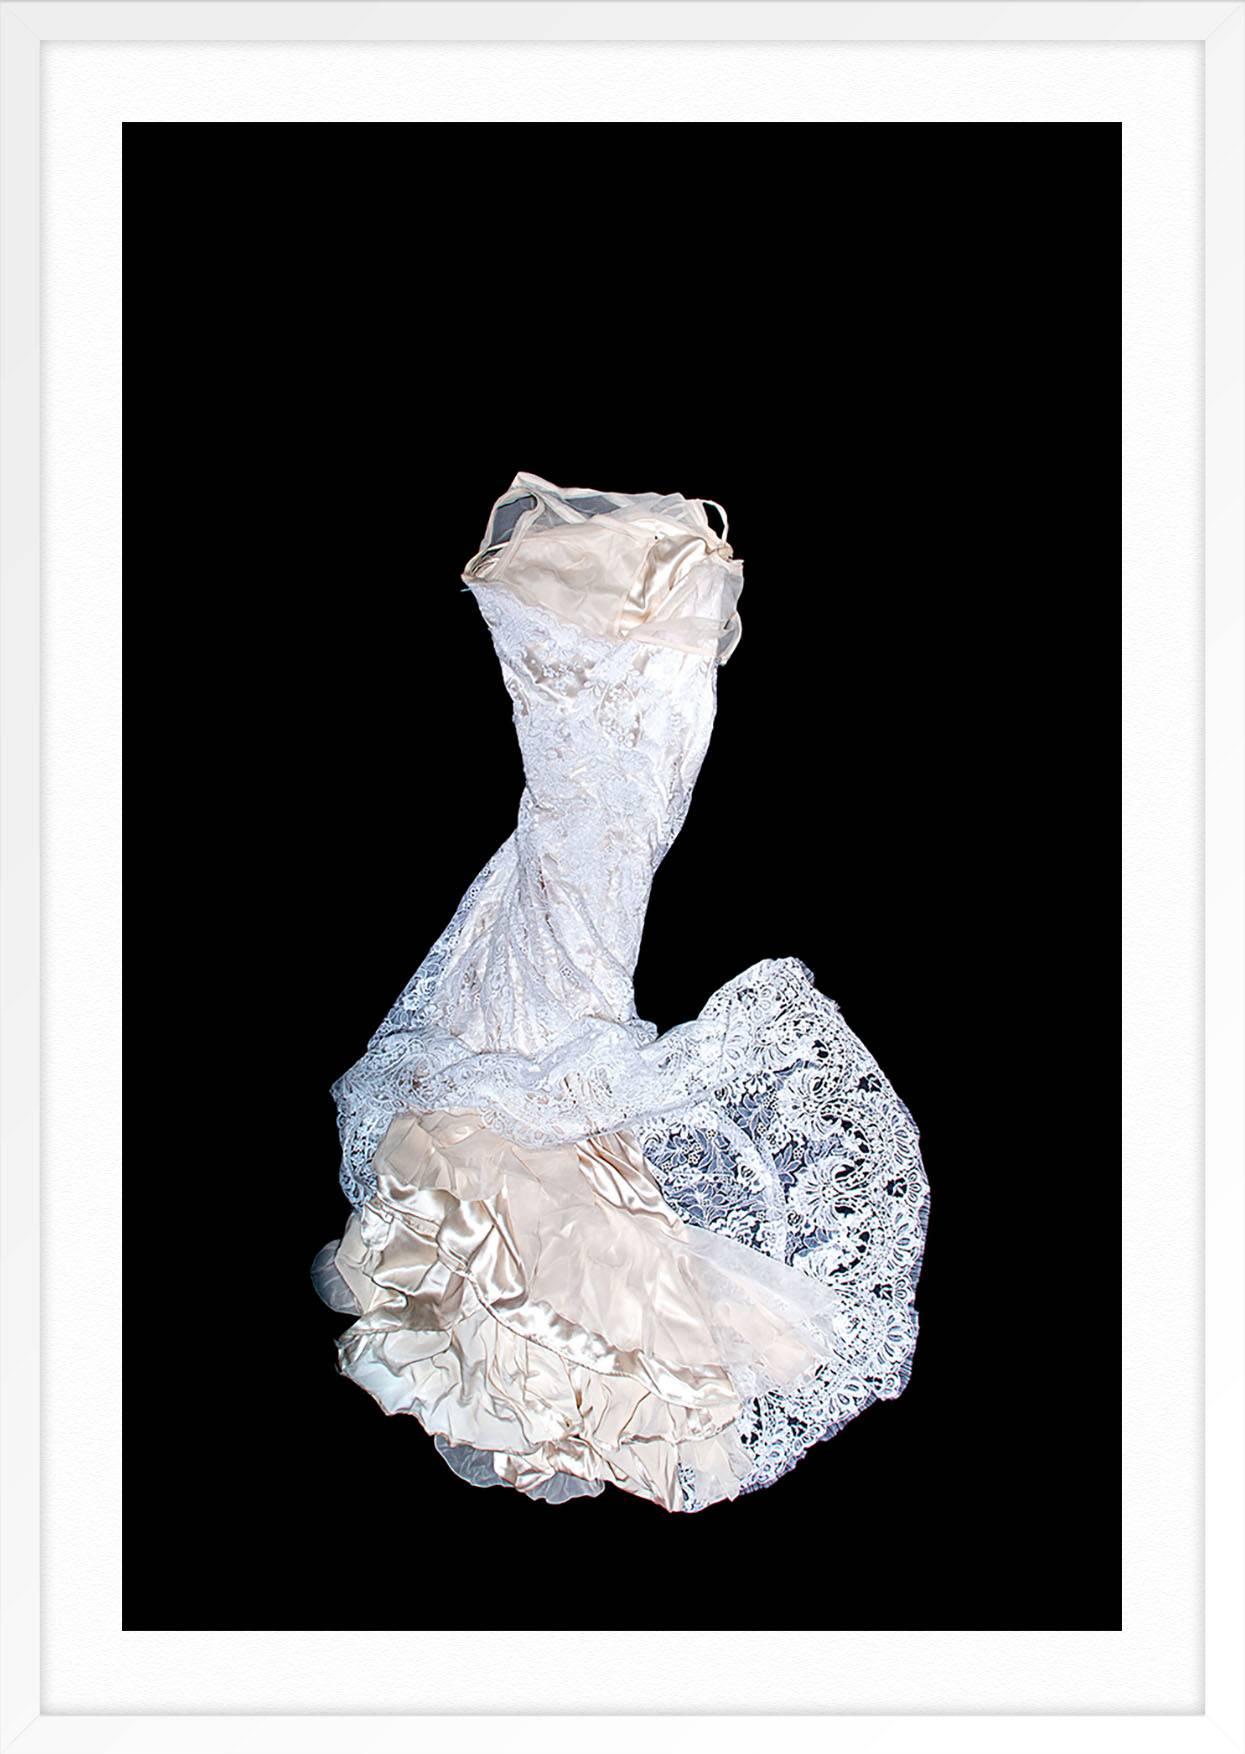 ABOUT THE PIECE: Photographer J. M. Giordano collaborated with gown designer Jill Andrews to shoot bridal gowns which were returned for repair after the wedding night. The series looks at the gowns as artifacts and metaphors for the bride's second